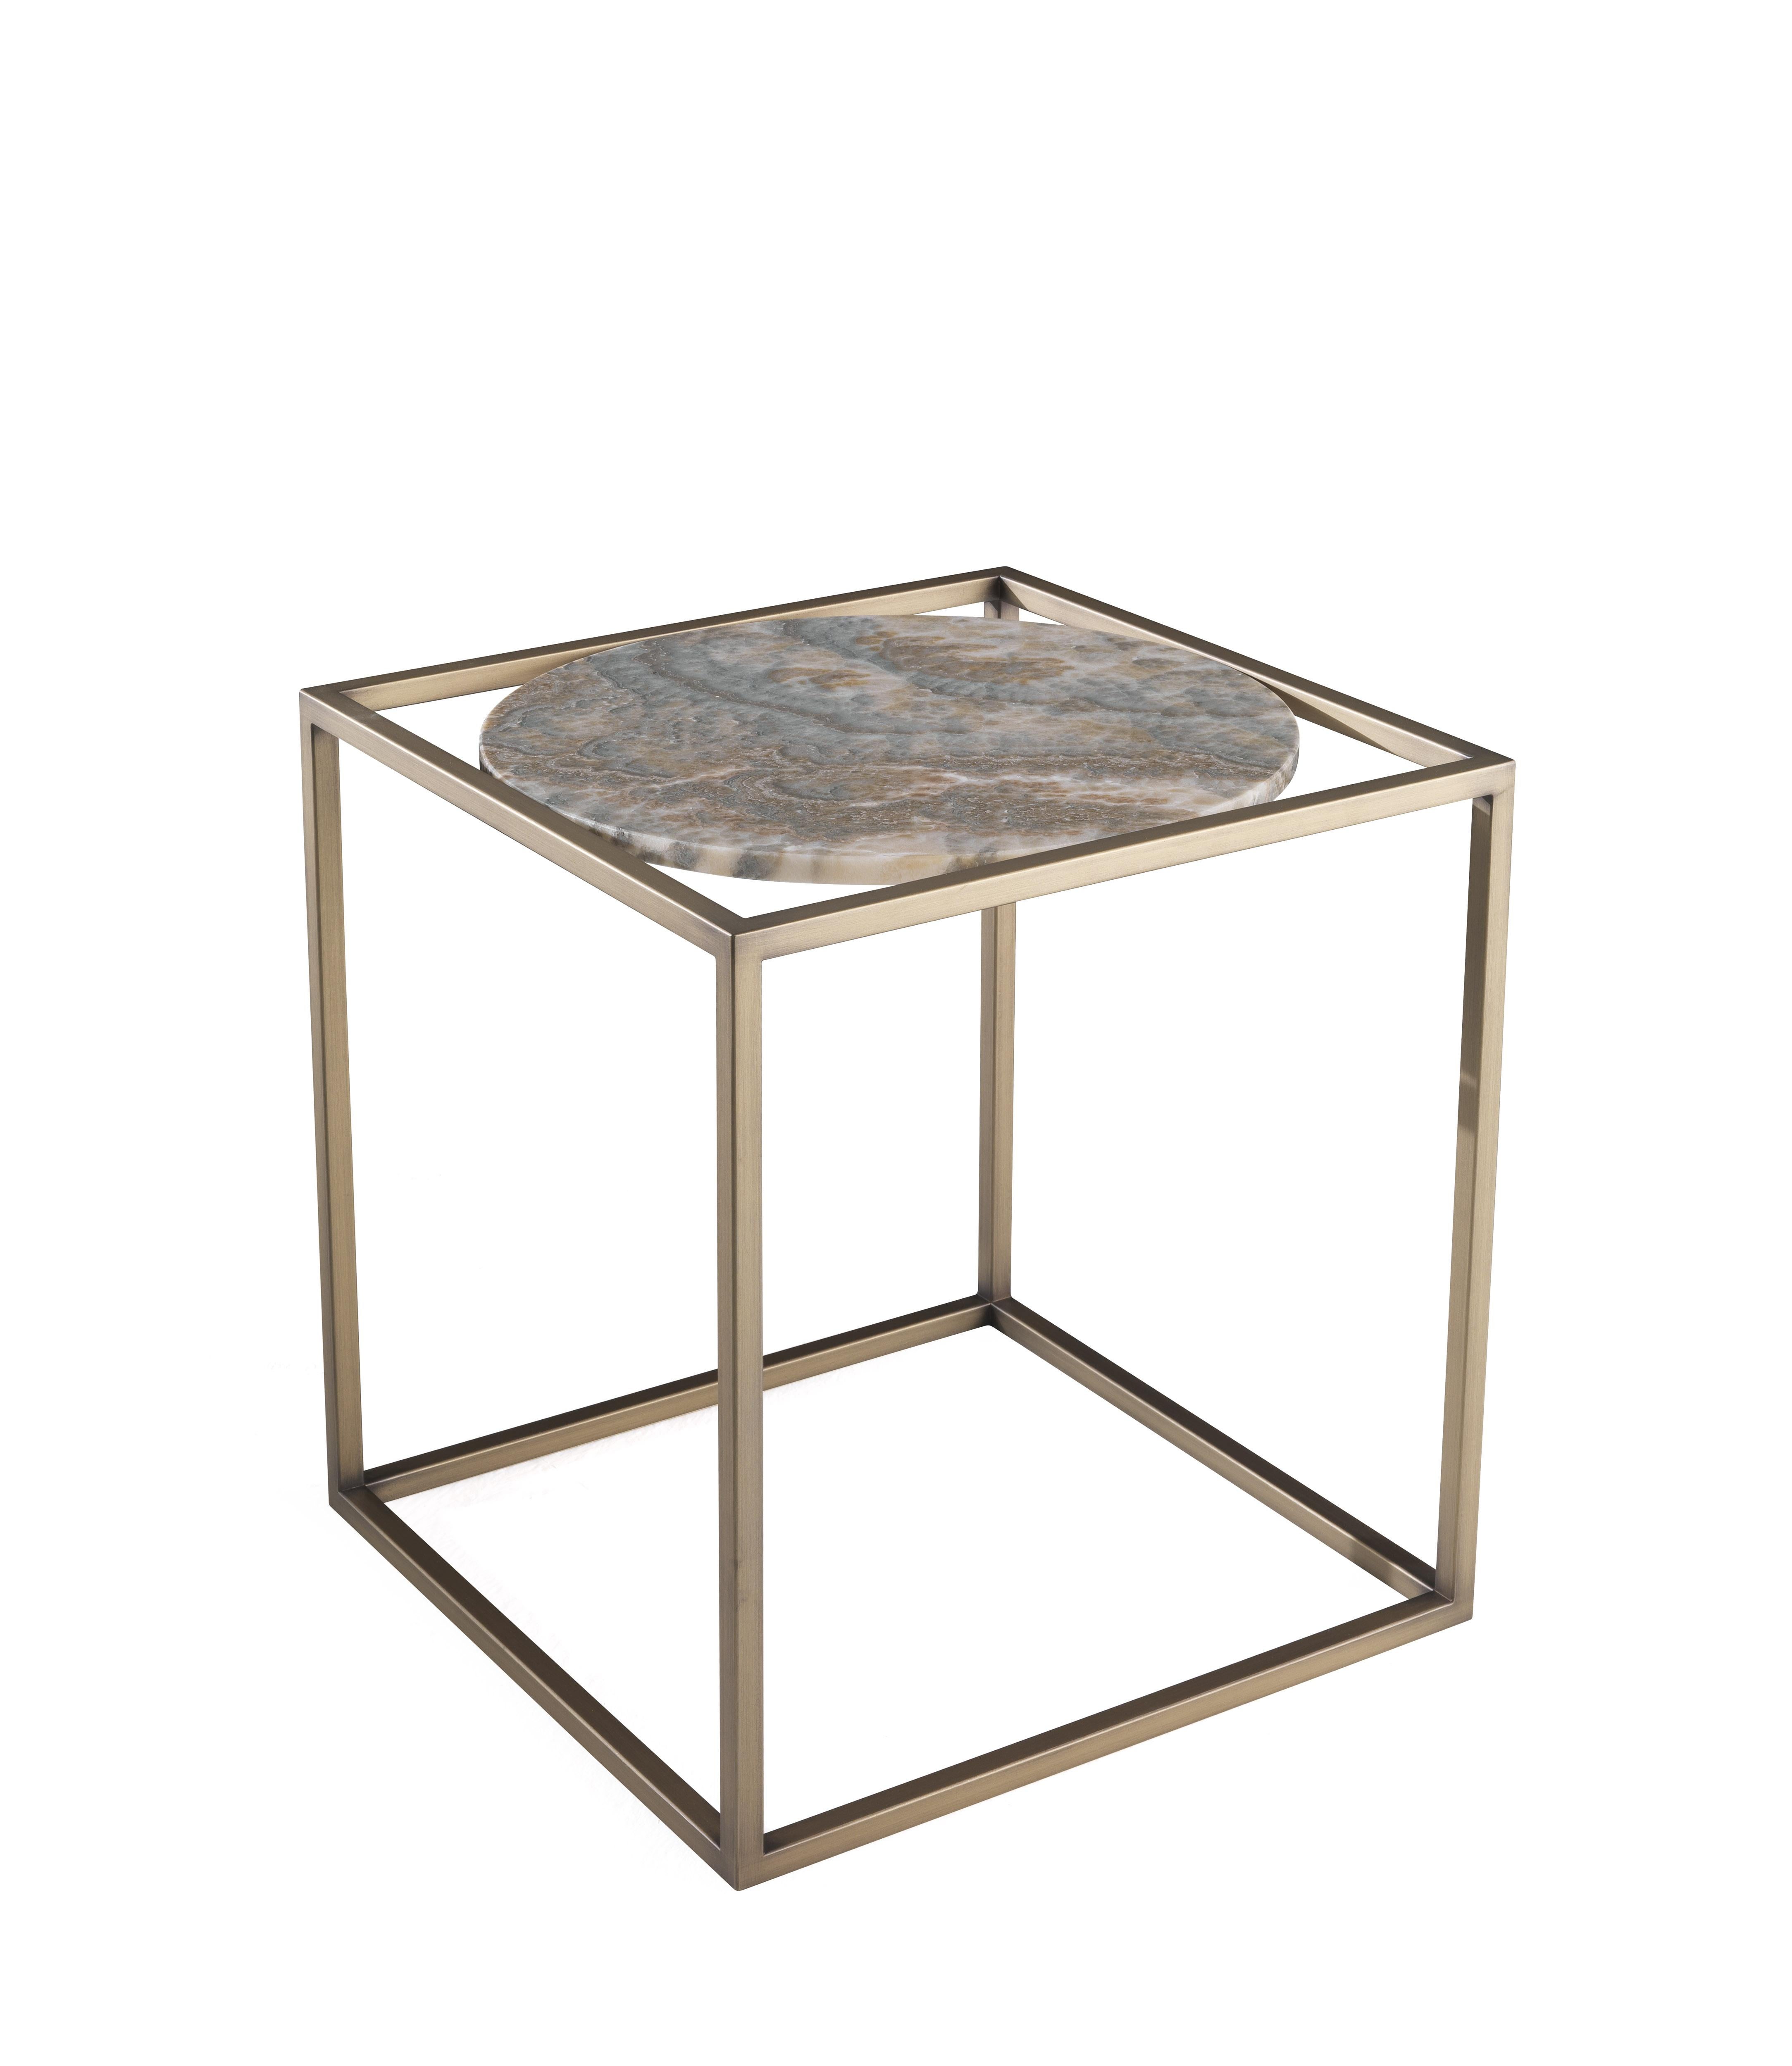 A composition of geometric shapes and different materials for a table that combines the vintage charm of the rectangular structure with bronzed finish with the precious and timeless appeal of the round top in gray onyx.
The Norrebro side table with